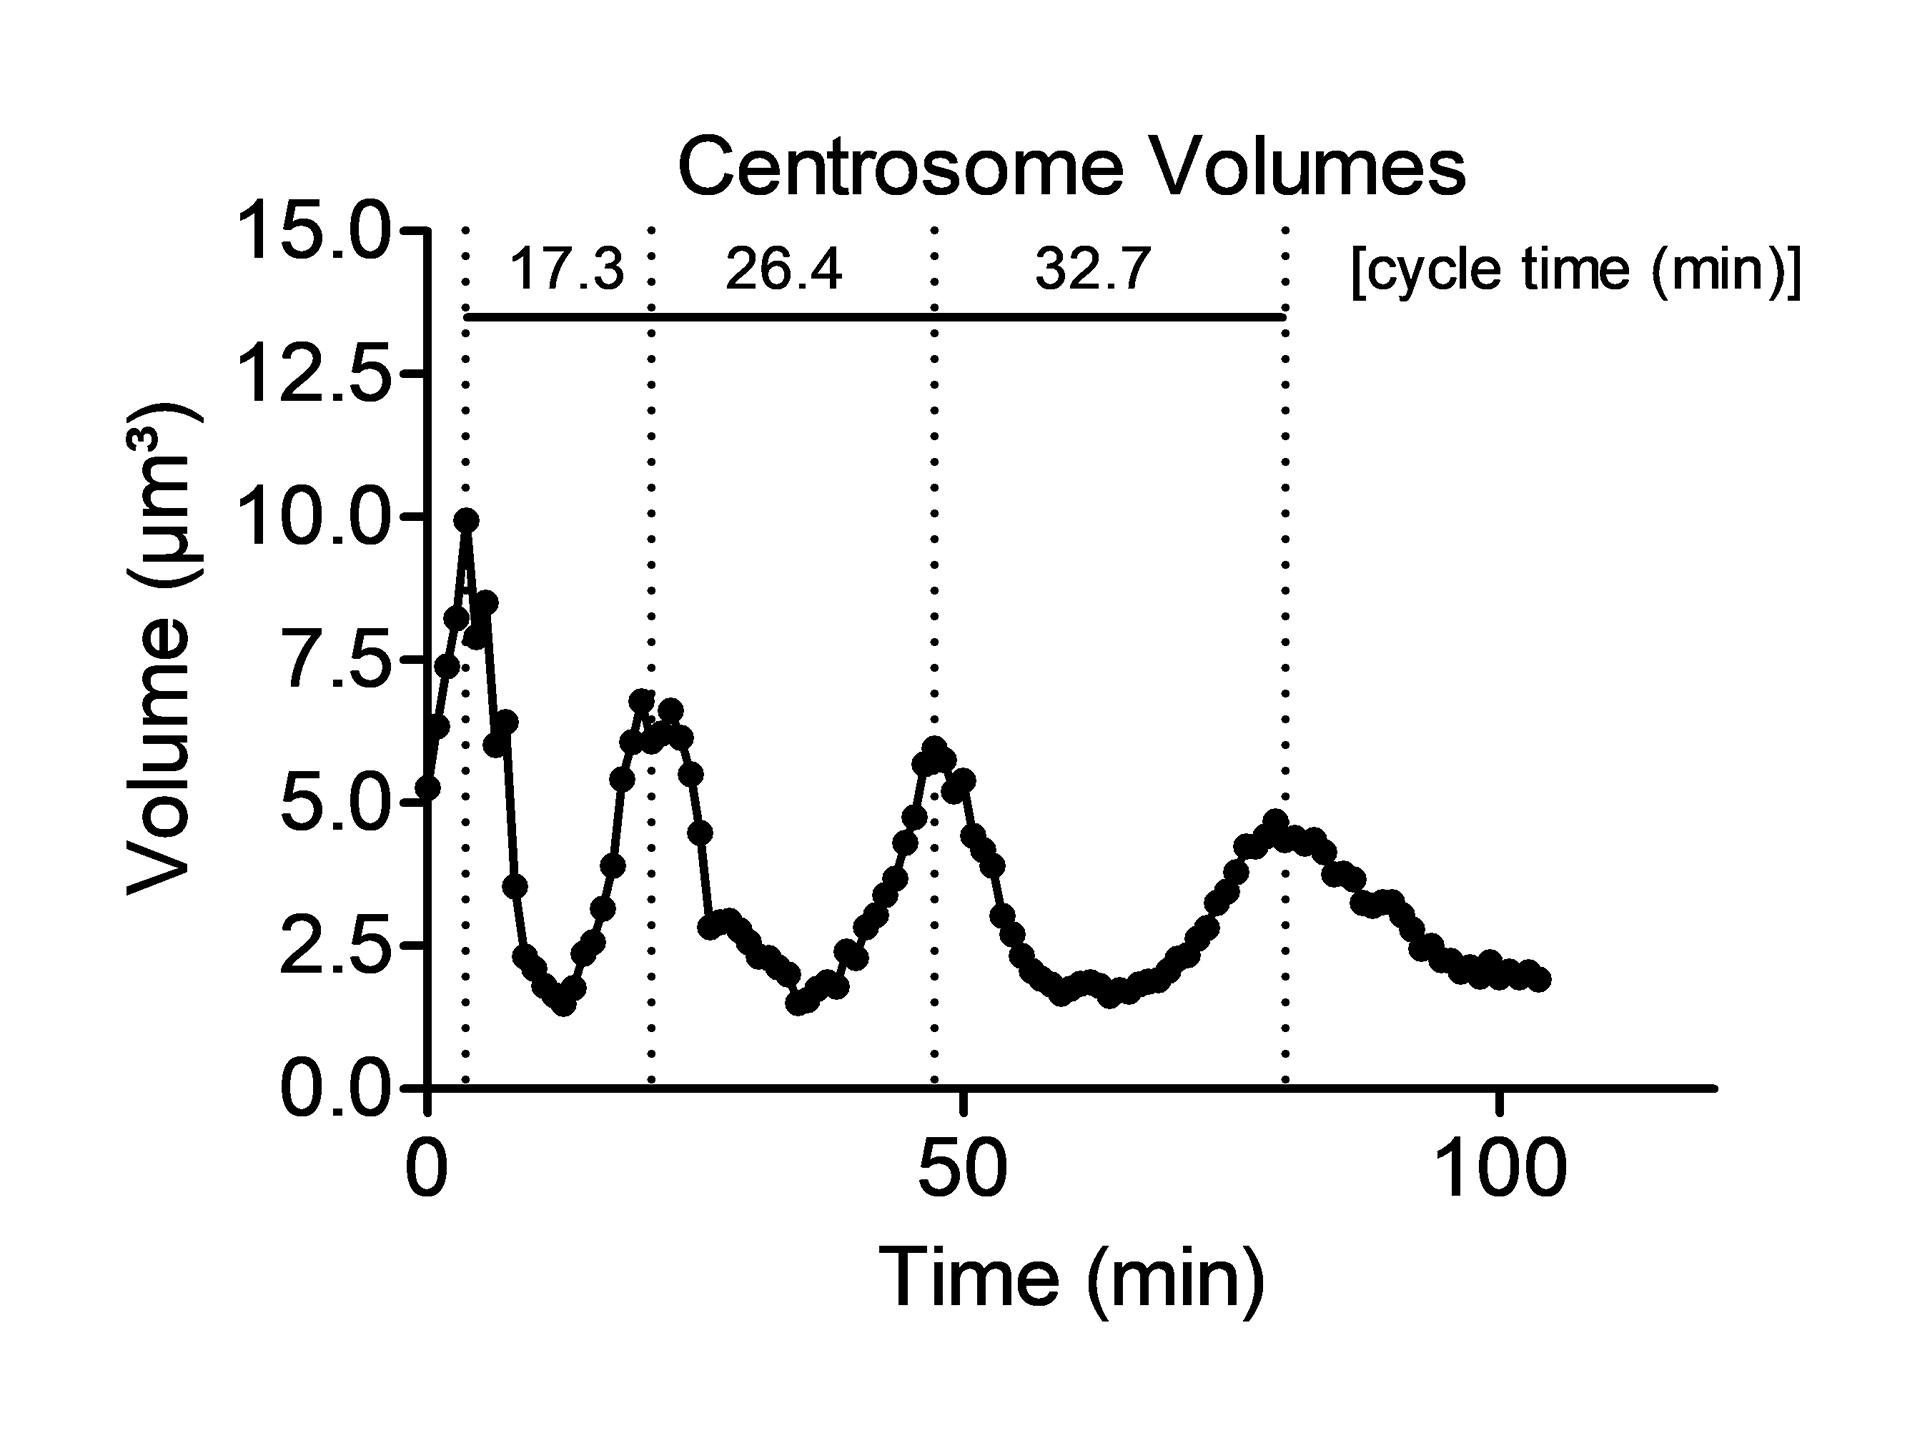 Figure 3A: Centrosome volumes. Volumes were averaged for every single time point. Vertical lines identify peak volumes linked to waves of mitotic division.